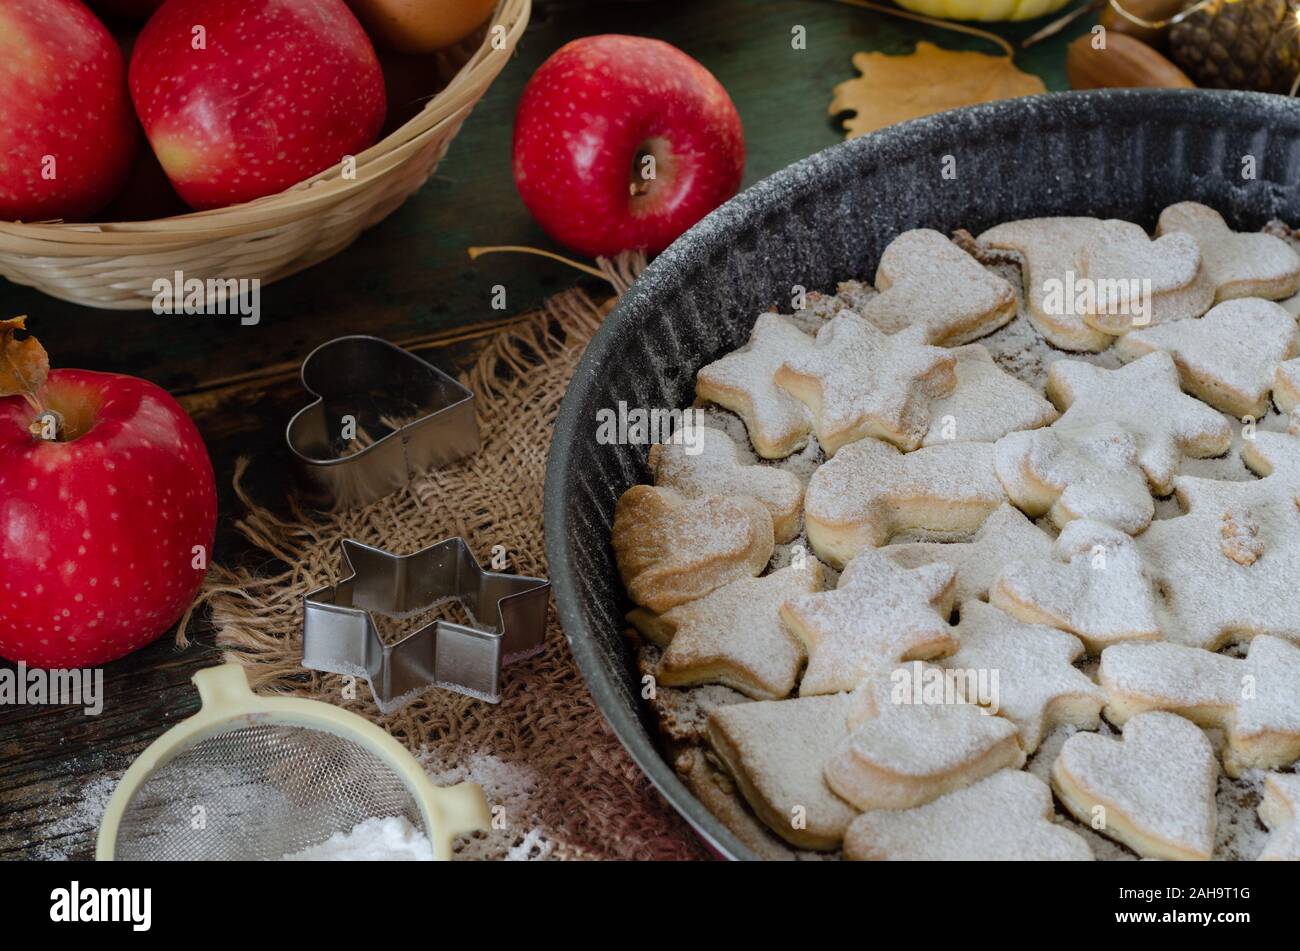 Fresh baked homemade apple pie on a wood table with cutter and apples. Stock Photo